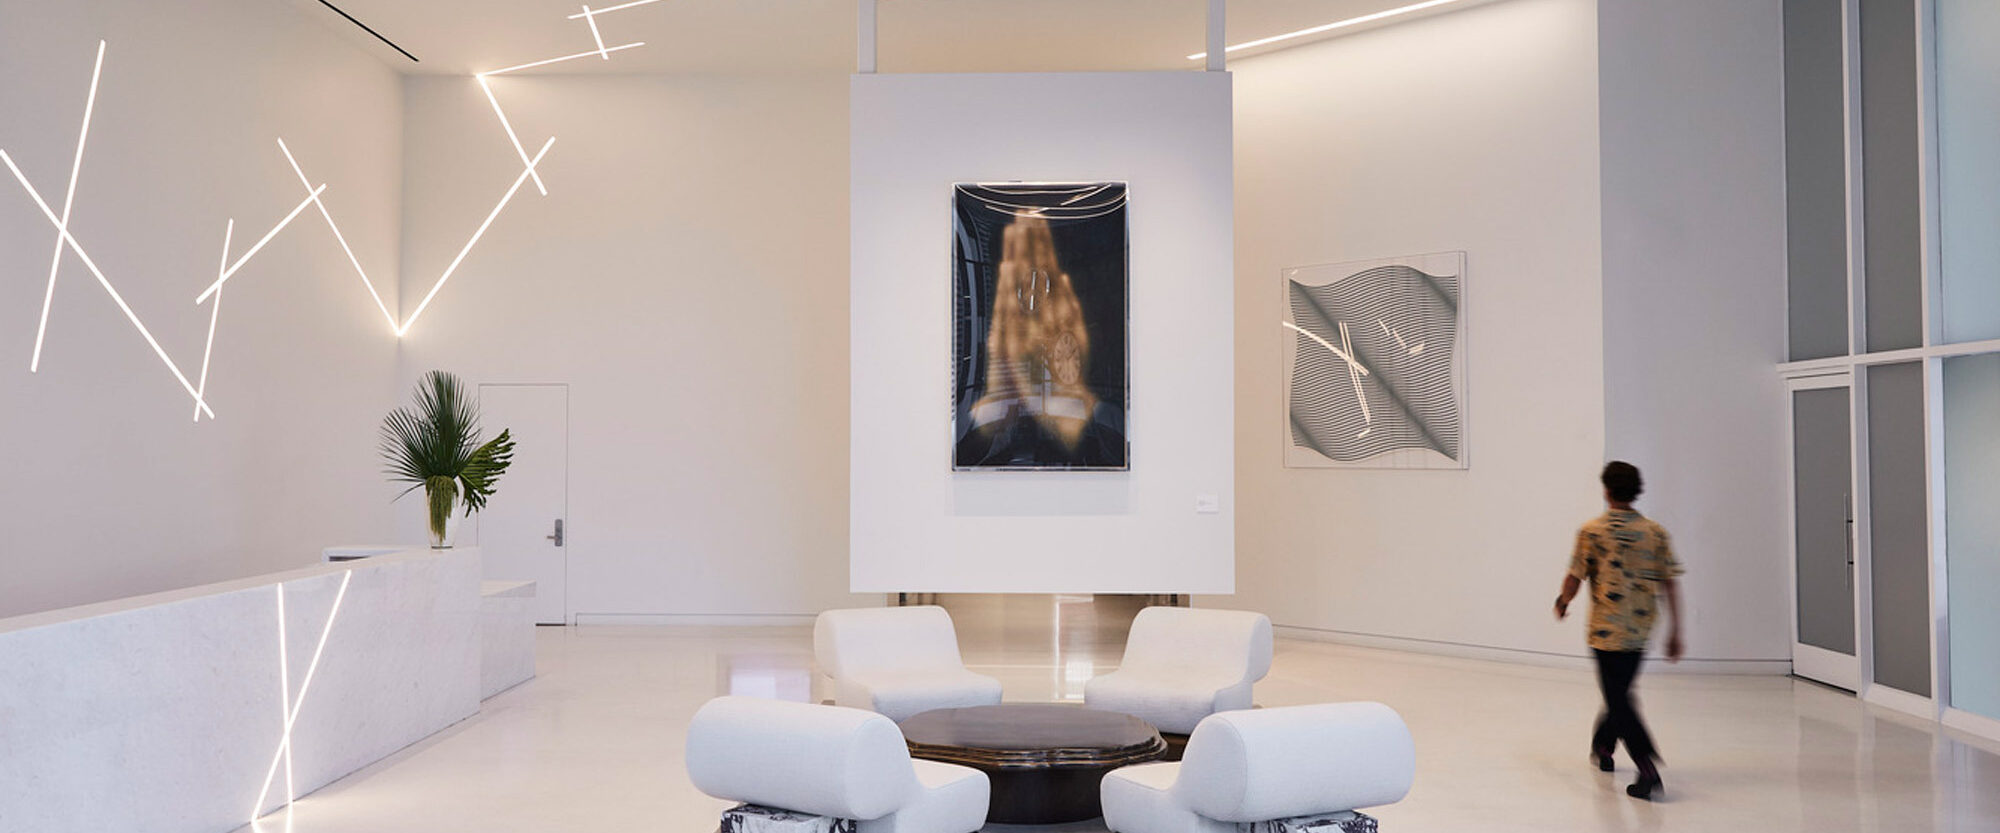 Modern interior design showcasing a minimalist aesthetic with stark white walls, polished concrete floors, and abstract ceiling lighting. Central seating area features sleek armchairs around a dark wooden table, complemented by large-scale contemporary artwork on the walls.